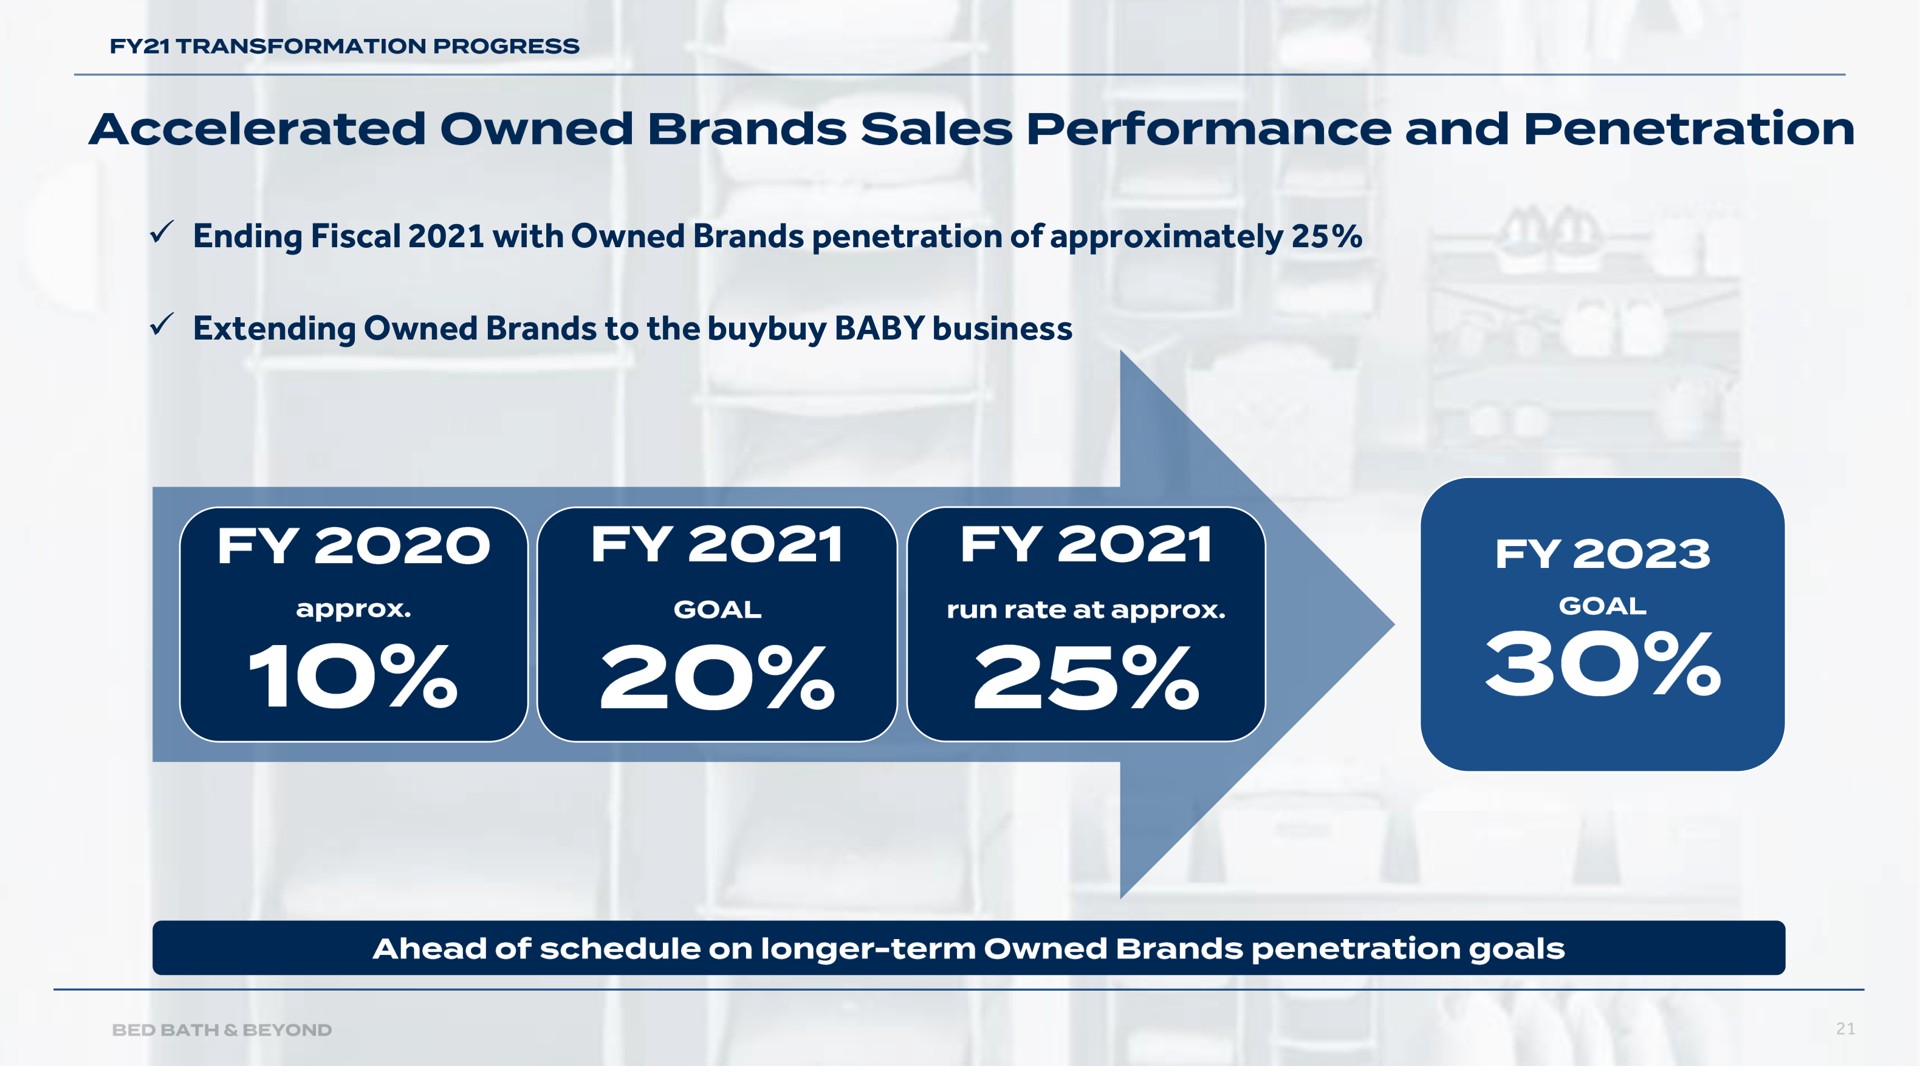 ending fiscal with owned brands penetration of approximately extending owned brands to the baby business accelerated sales performance and | Bed Bath & Beyond